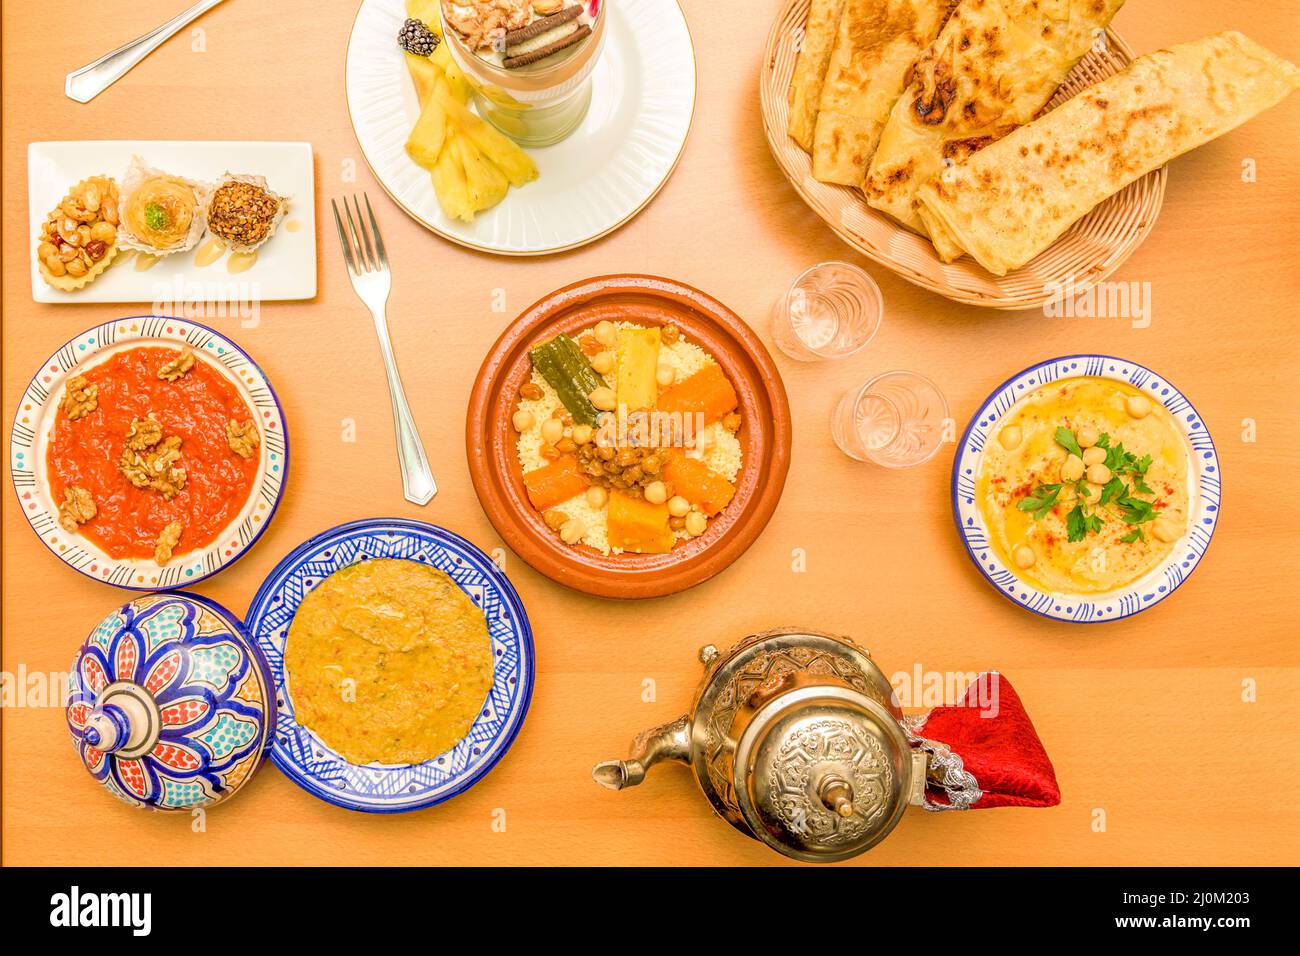 Colorful Moroccan food plates with couscous, lamb tagine, baklava, hummus and smoothies Stock Photo